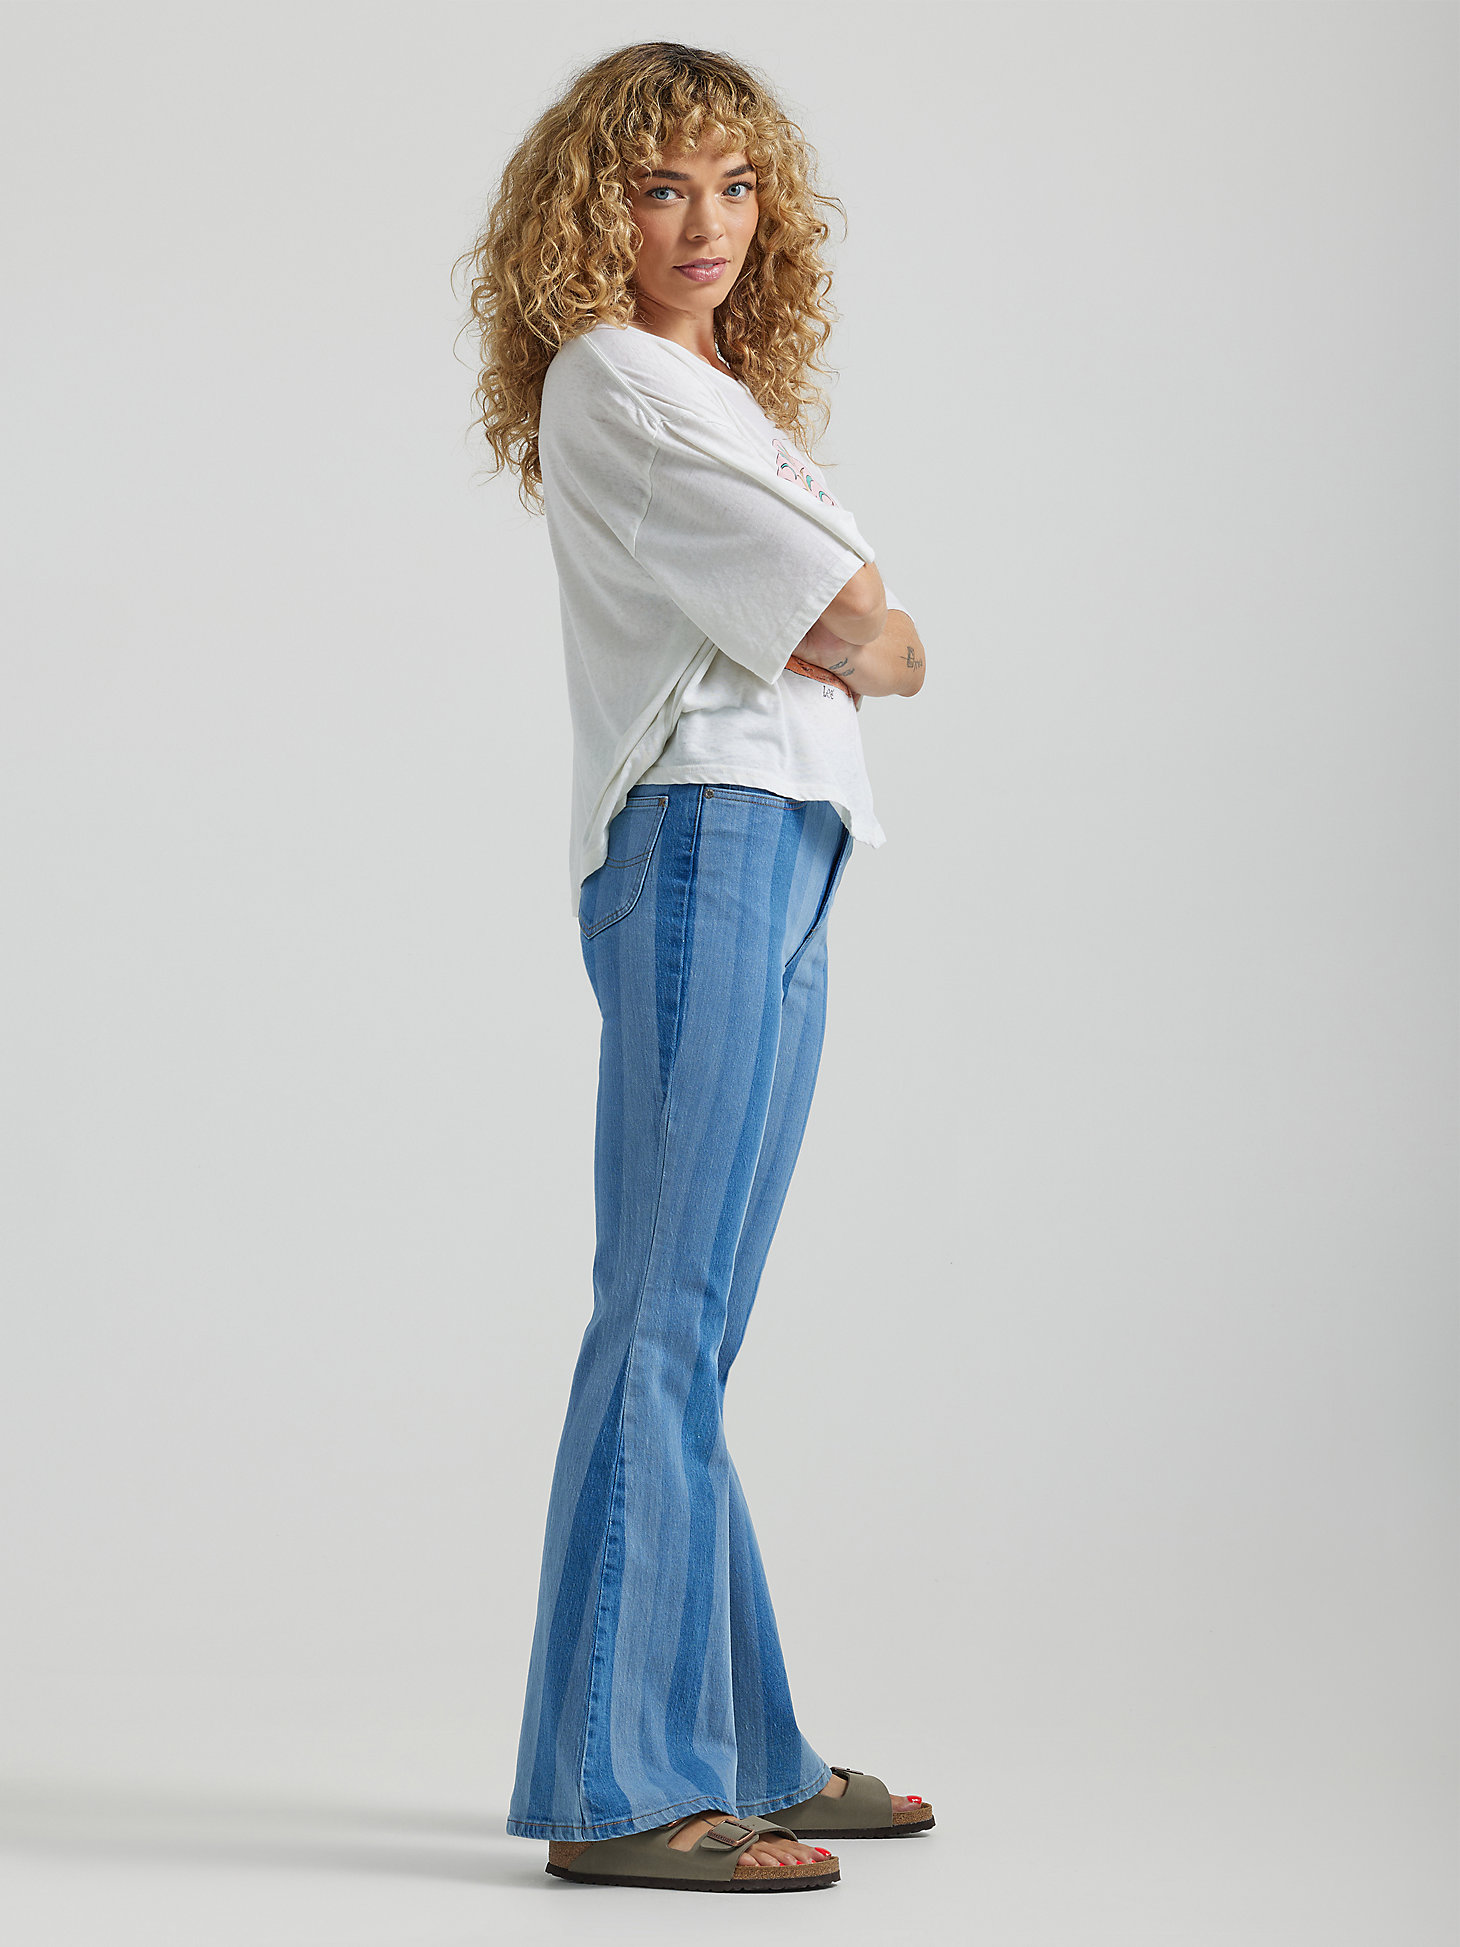 Women's High Rise Striped Flare Jean in Hits of Blue alternative view 2